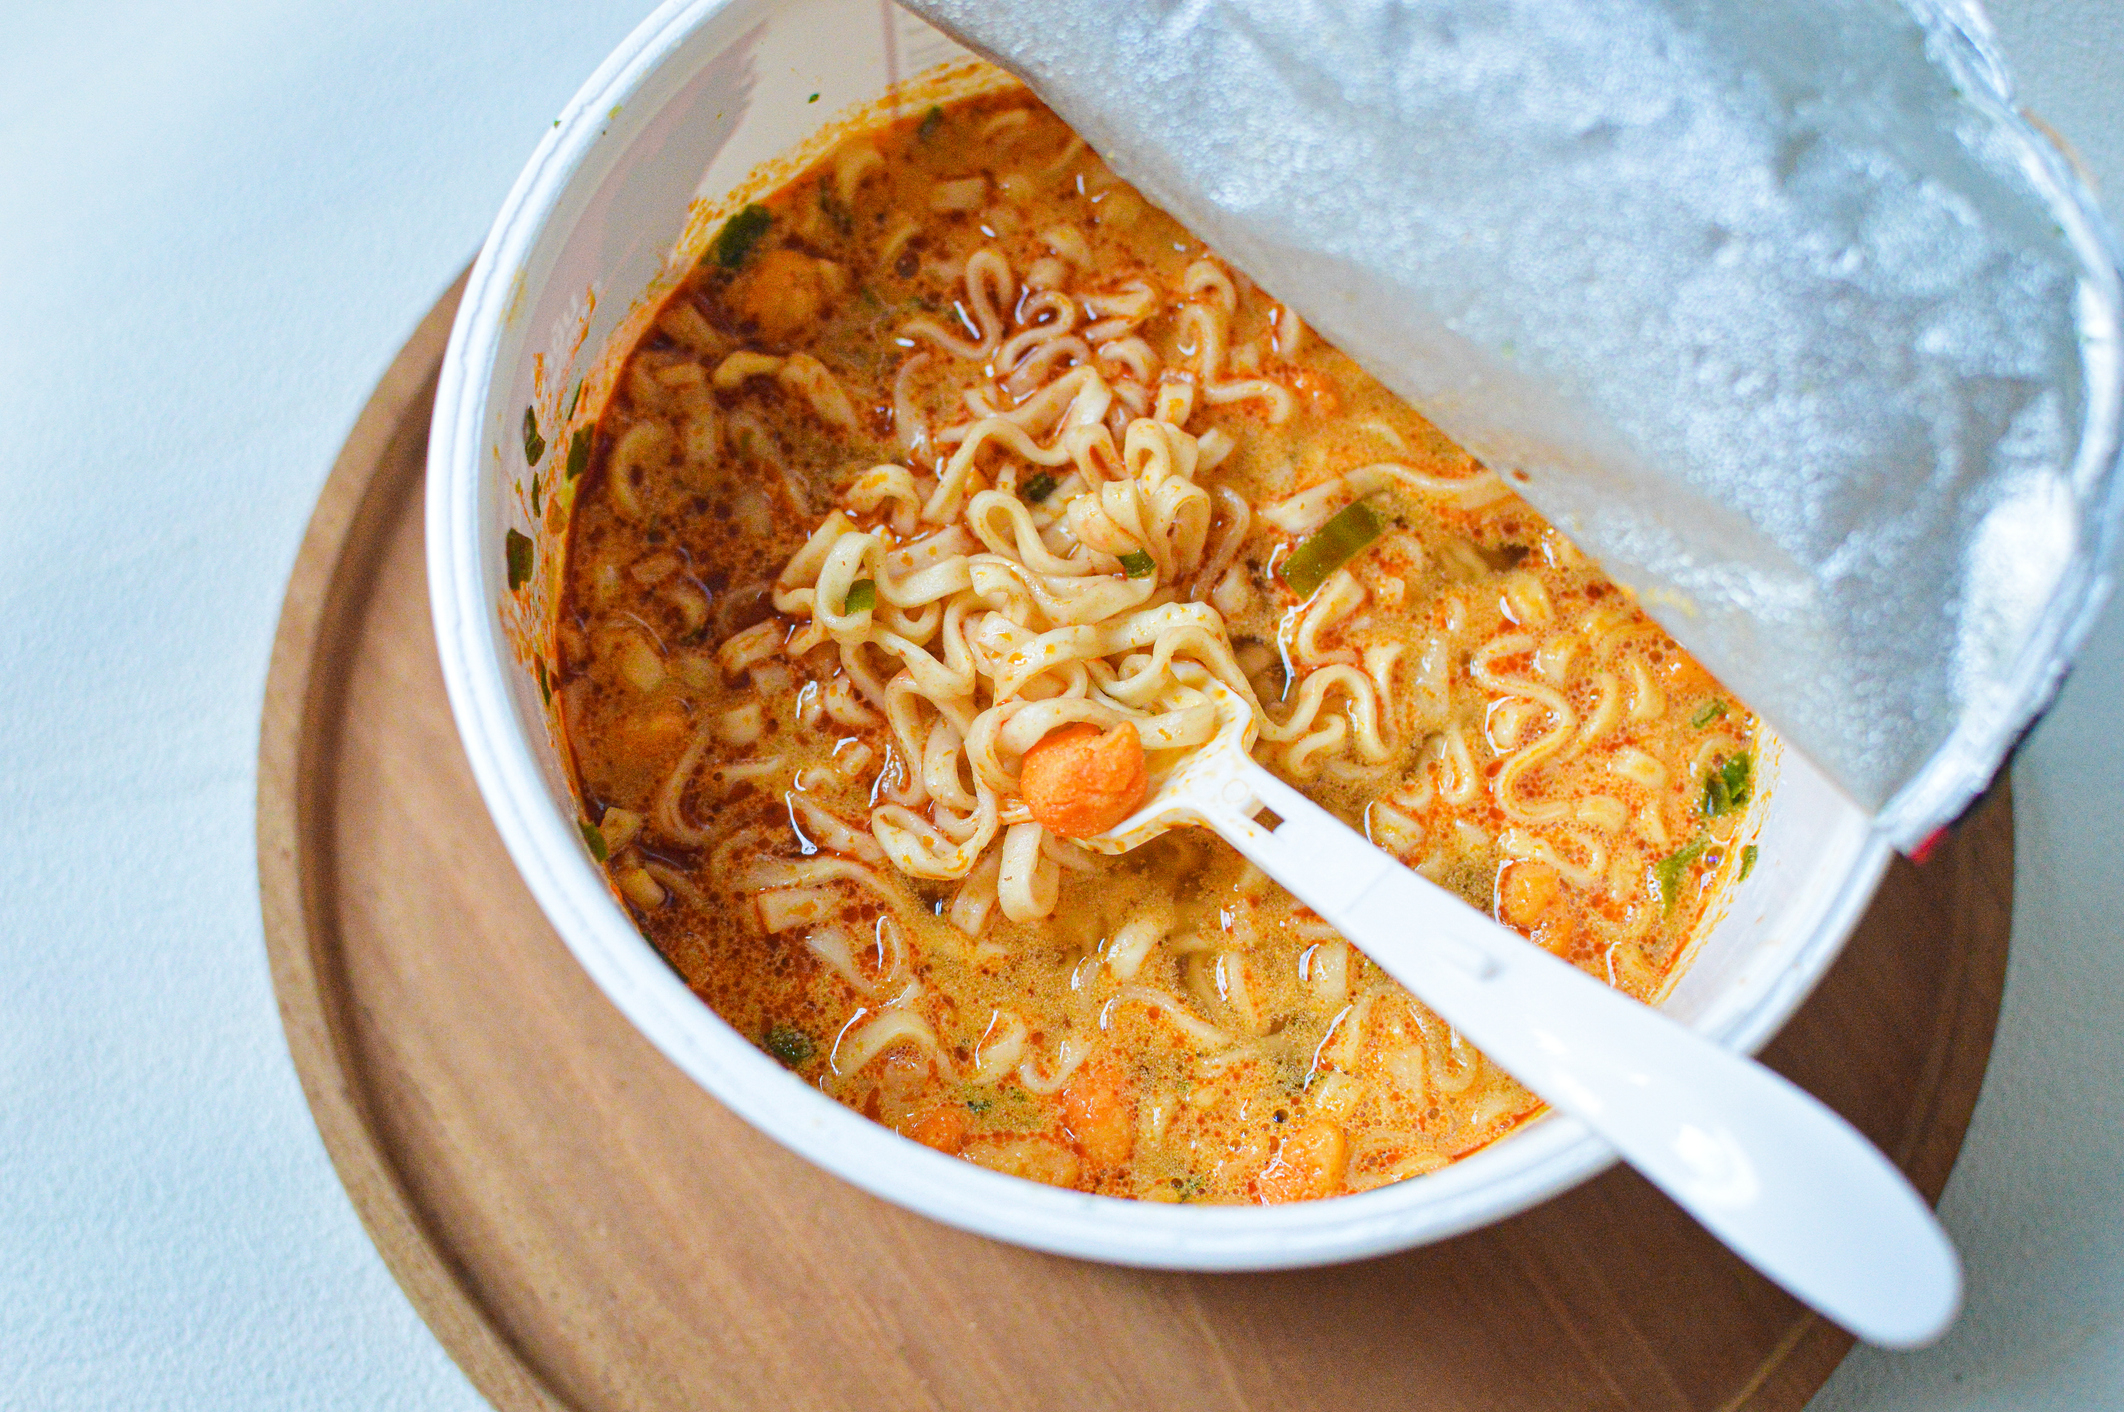 Bowl of spicy instant noodles with vegetables, partially covered by lid, with a spoon